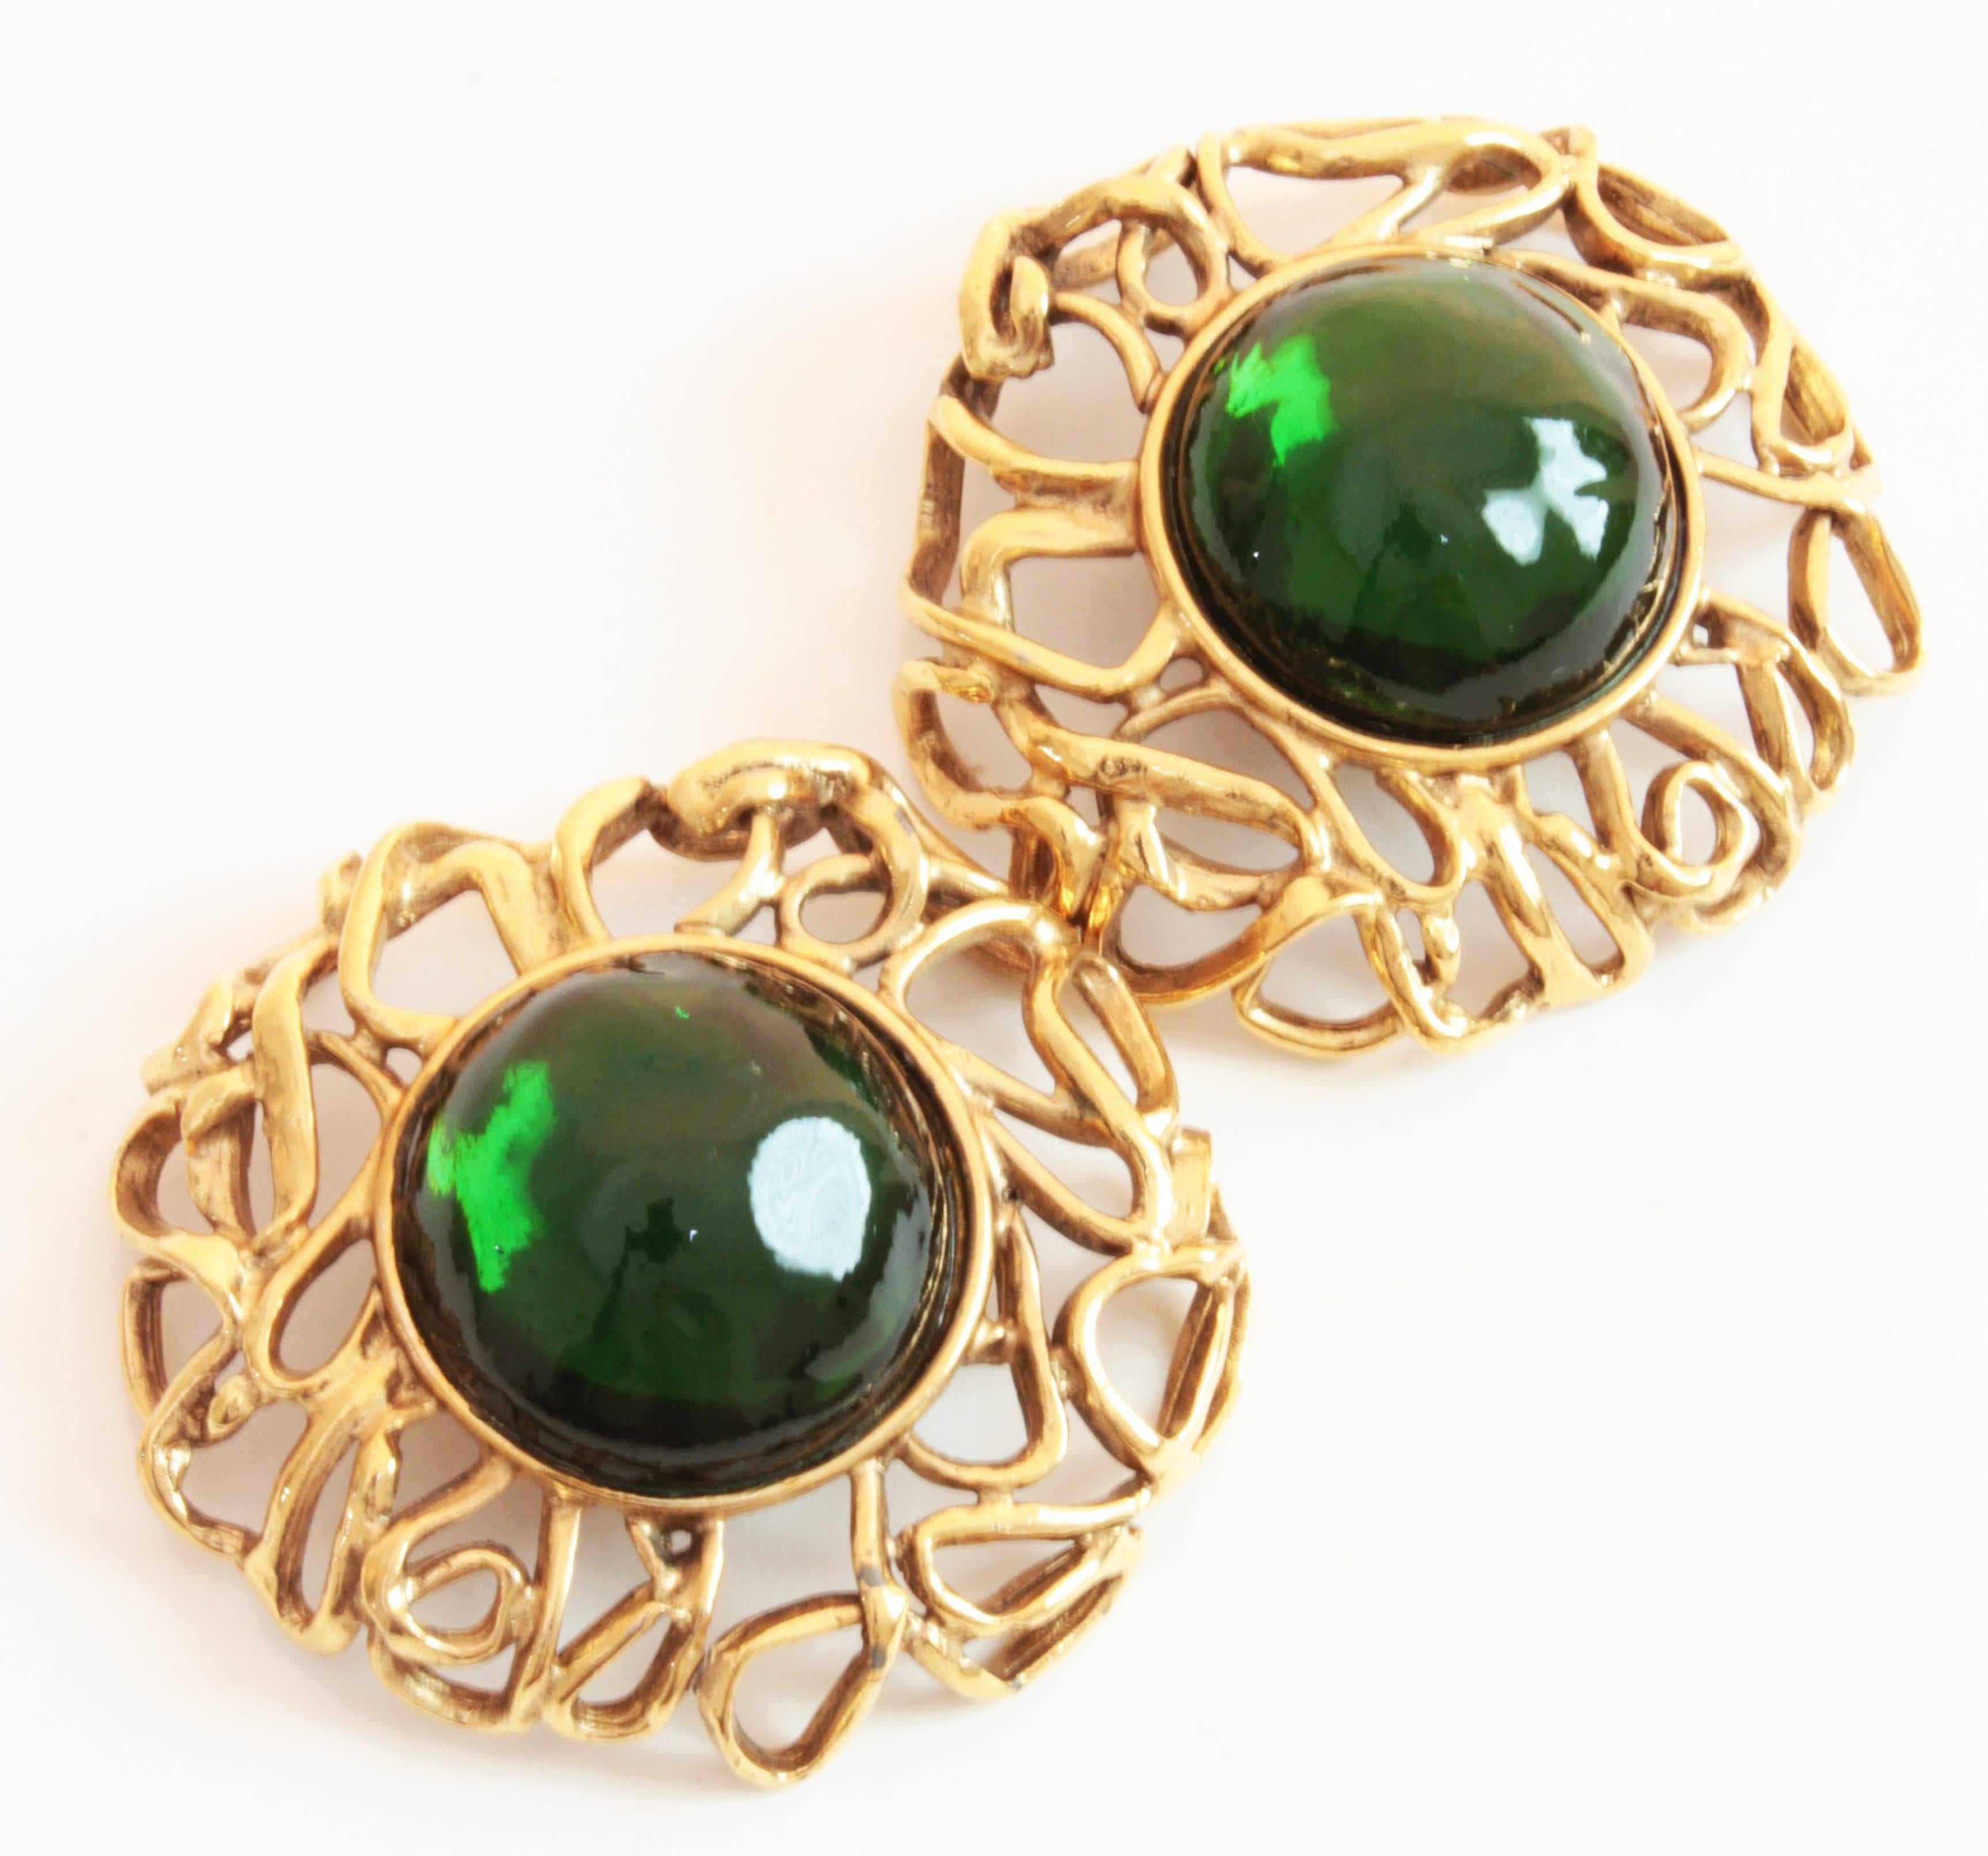 These incredible earrings were designed by Robert Goossens for Yves Saint Laurent in the mid-1970s and feature large emerald green glass cabs set in a swirling gold metal setting. Measuring appx 2.25in in diameter, these earrings are substantial and